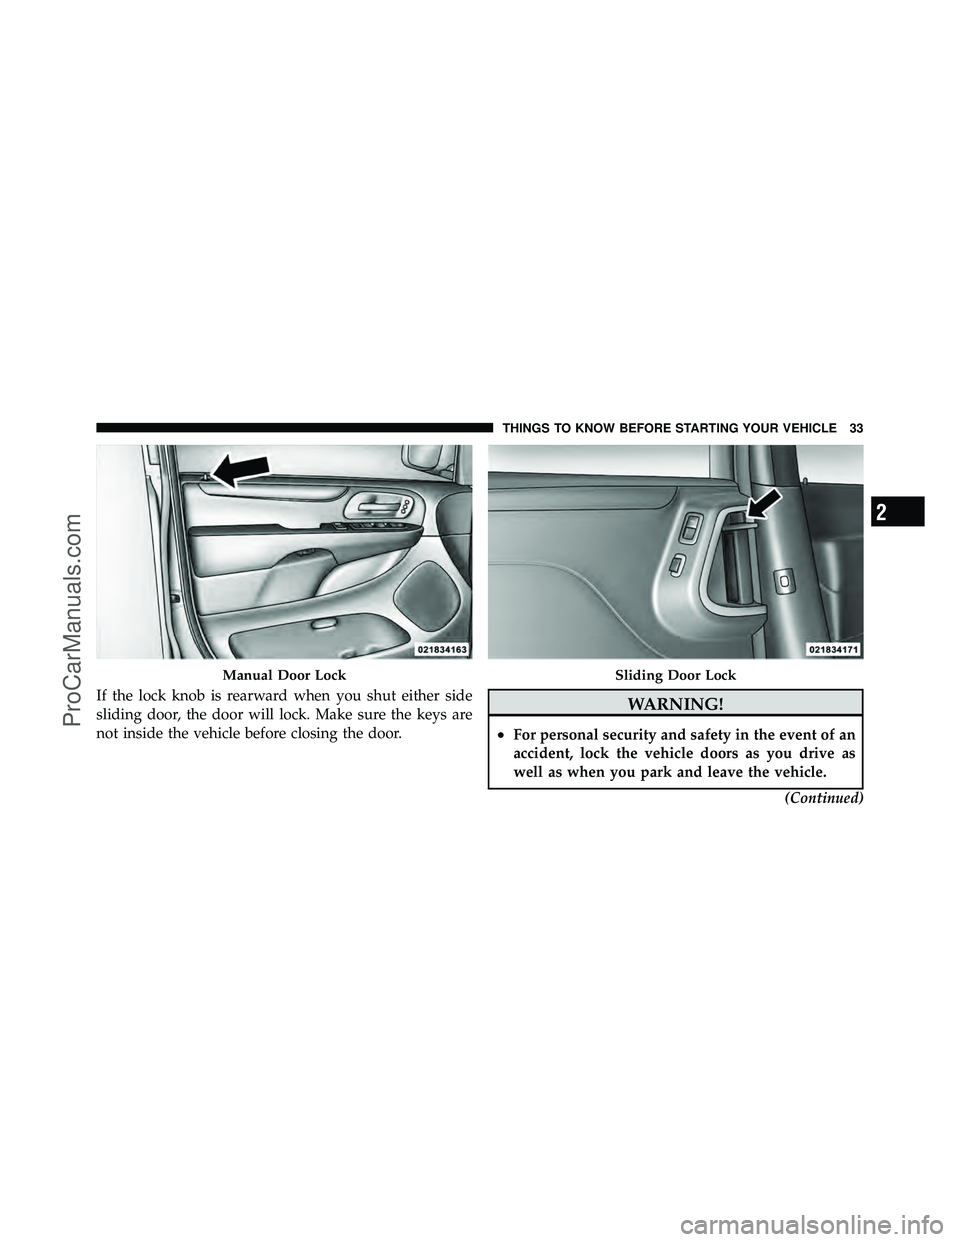 DODGE CARAVAN 2011 Owners Guide If the lock knob is rearward when you shut either side
sliding door, the door will lock. Make sure the keys are
not inside the vehicle before closing the door.WARNING!
•For personal security and saf